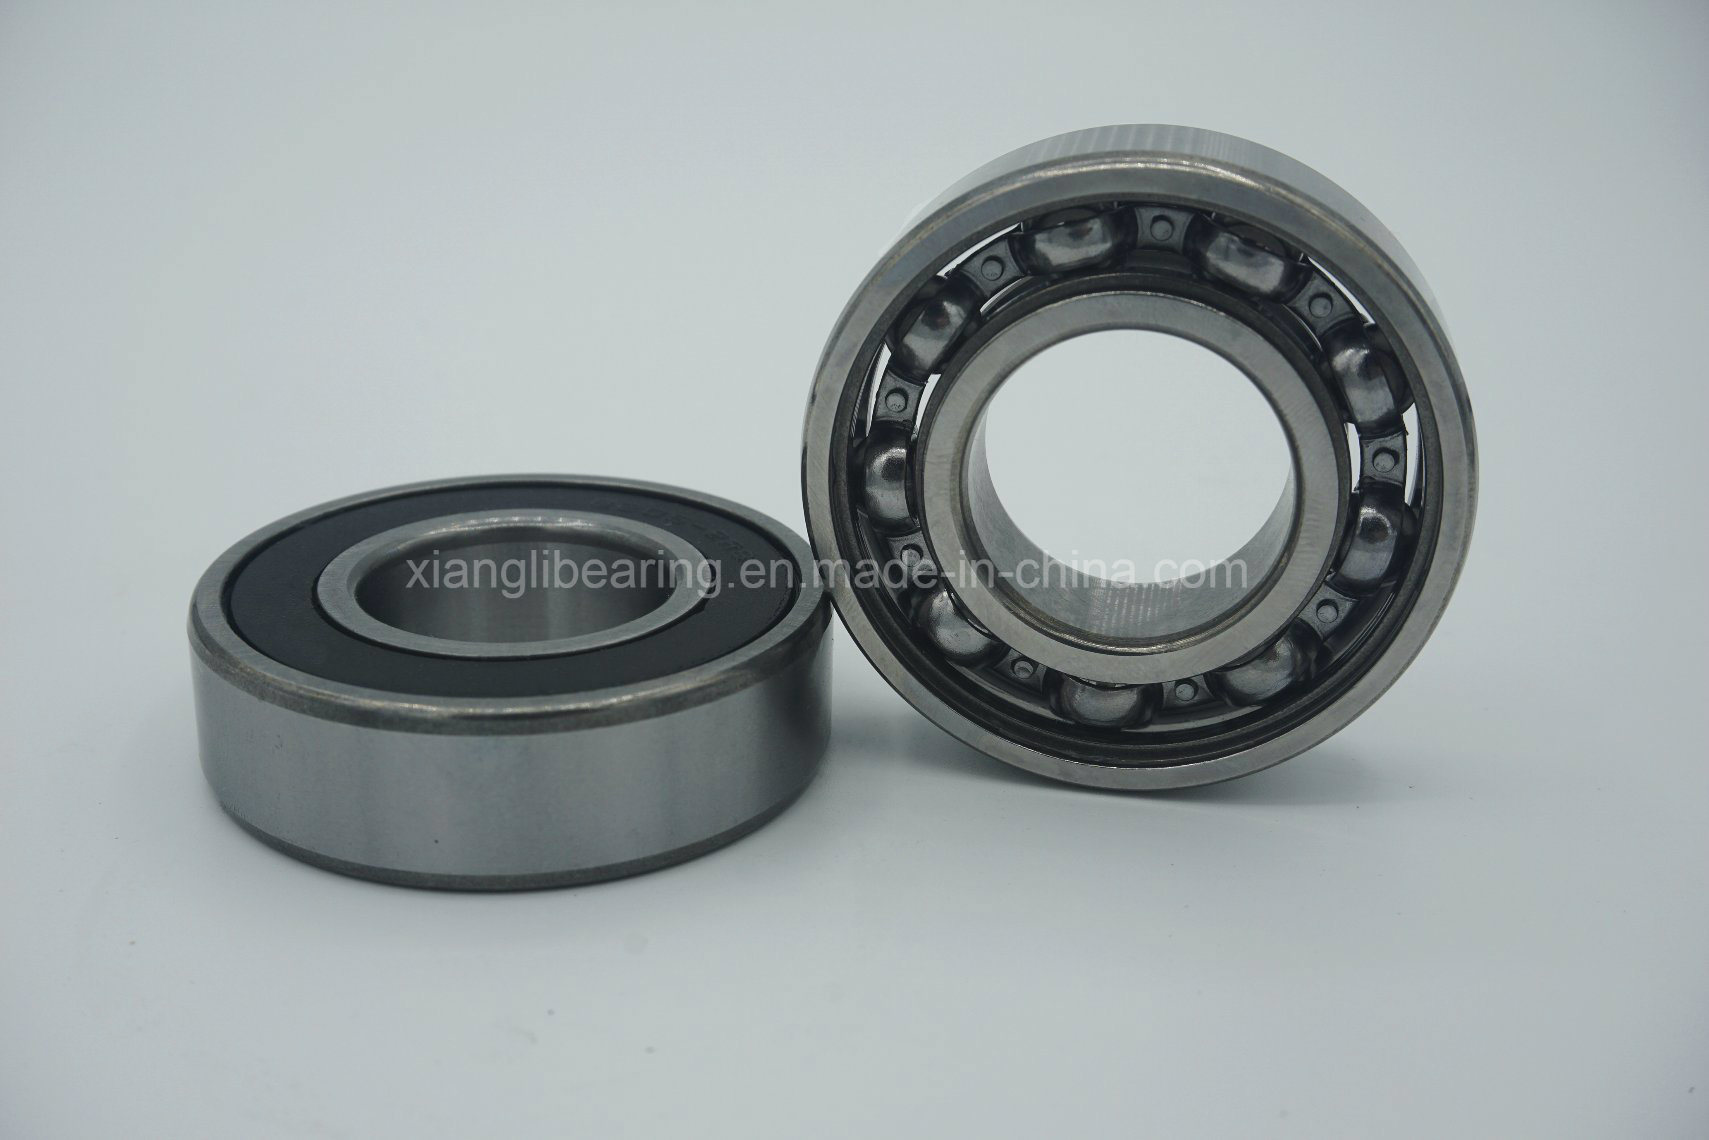 Auto High-Precision Deep Groove Ball Bearing 6205 (Open, Z, ZZ, RS, 2RS, RZ, 2RZ)